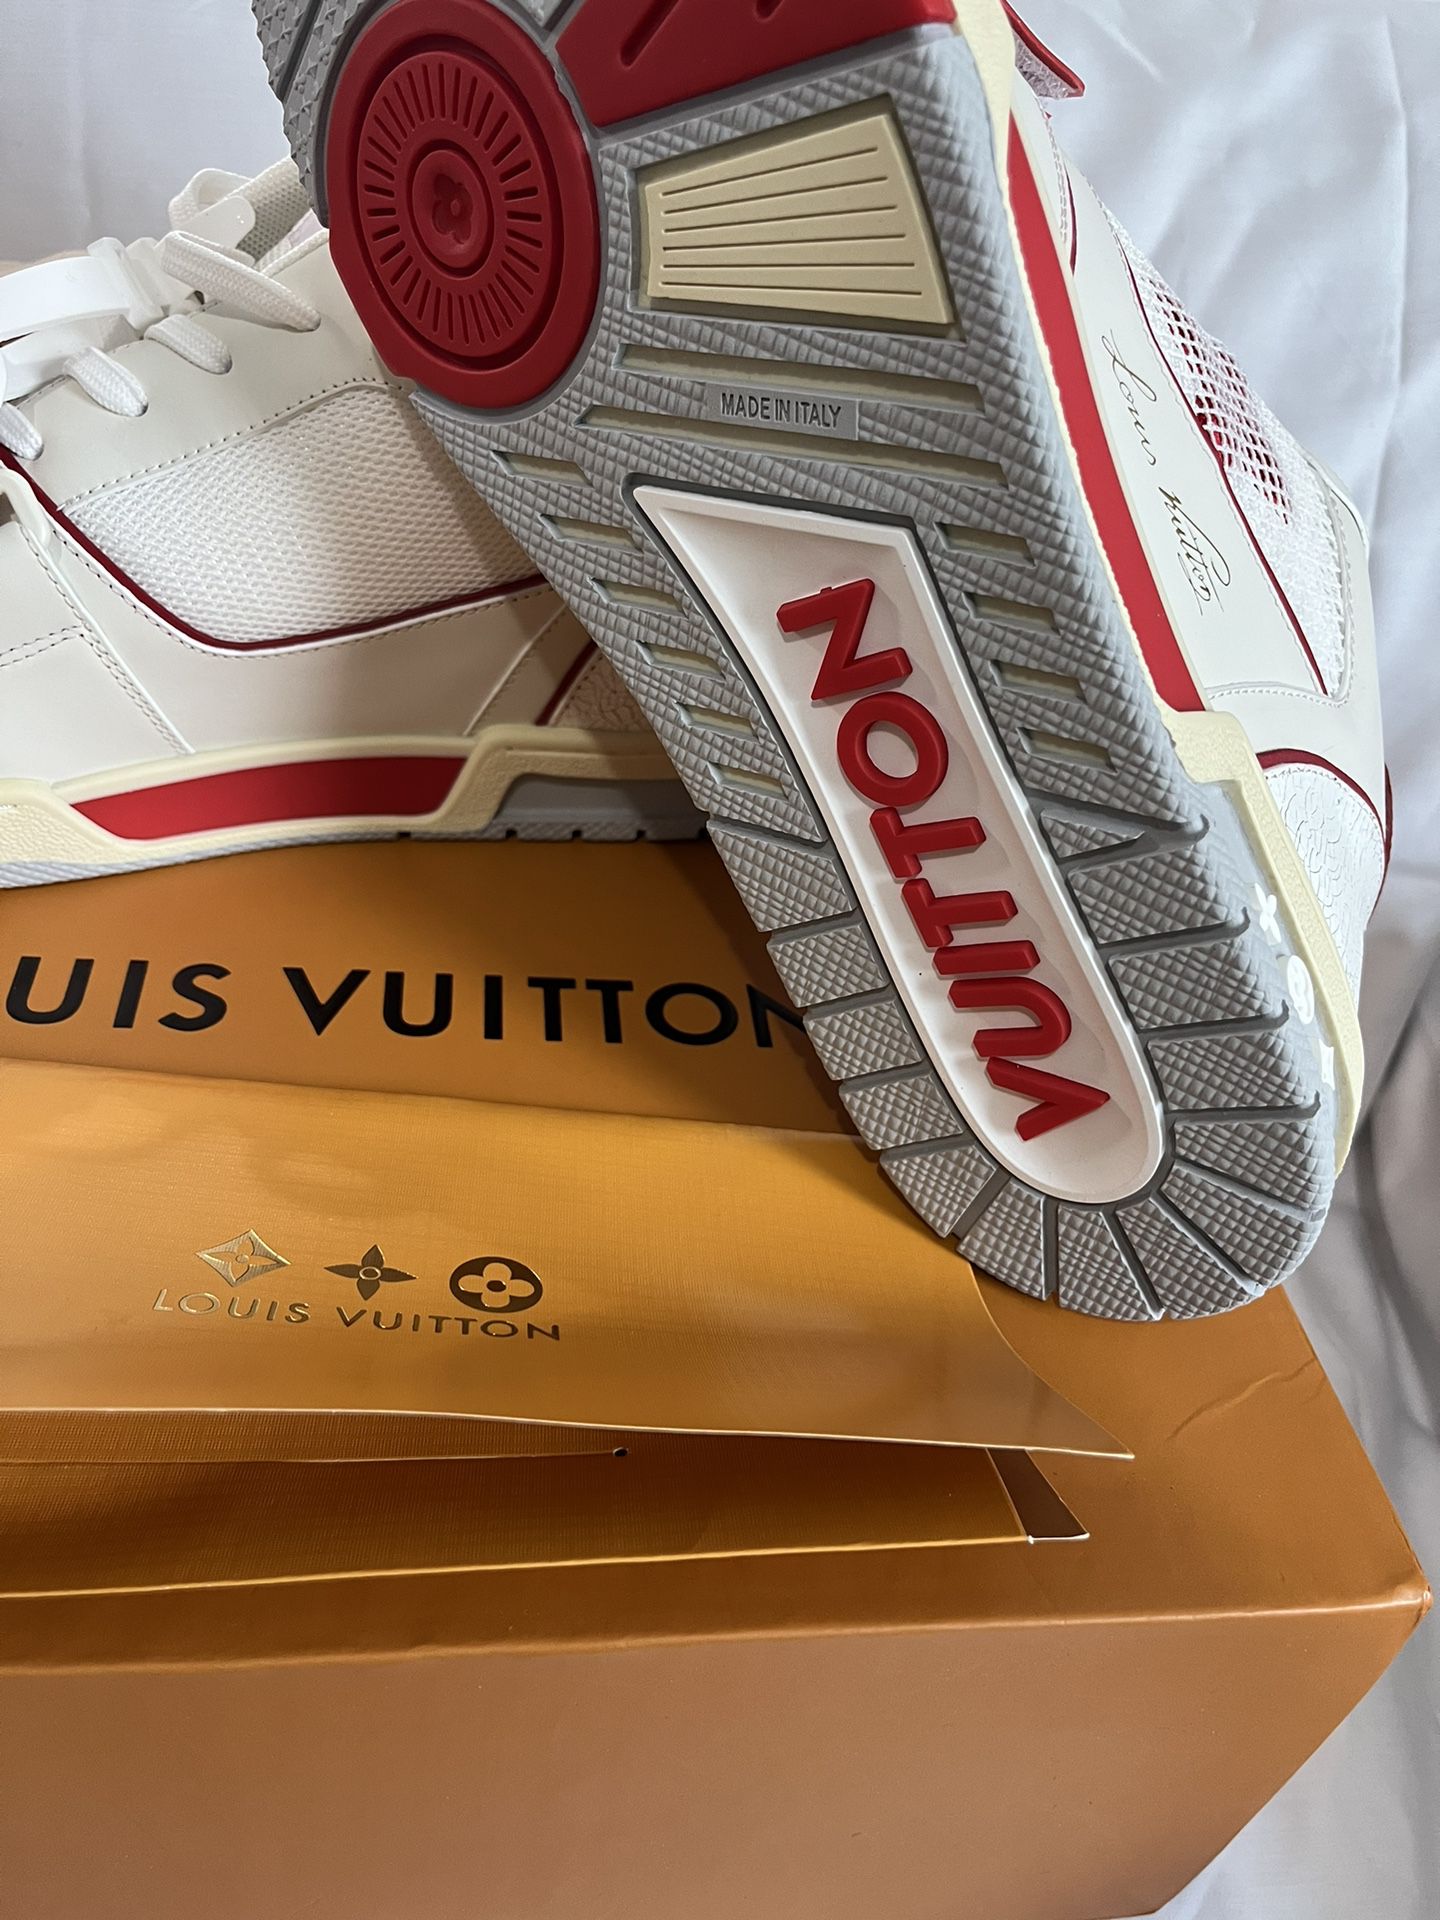 New Louis Vuitton RED/White Velcro strap Mono Trainer Sneakers (Euro 44 / men's 10-11) for Sale in Valley Stream, NY - OfferUp